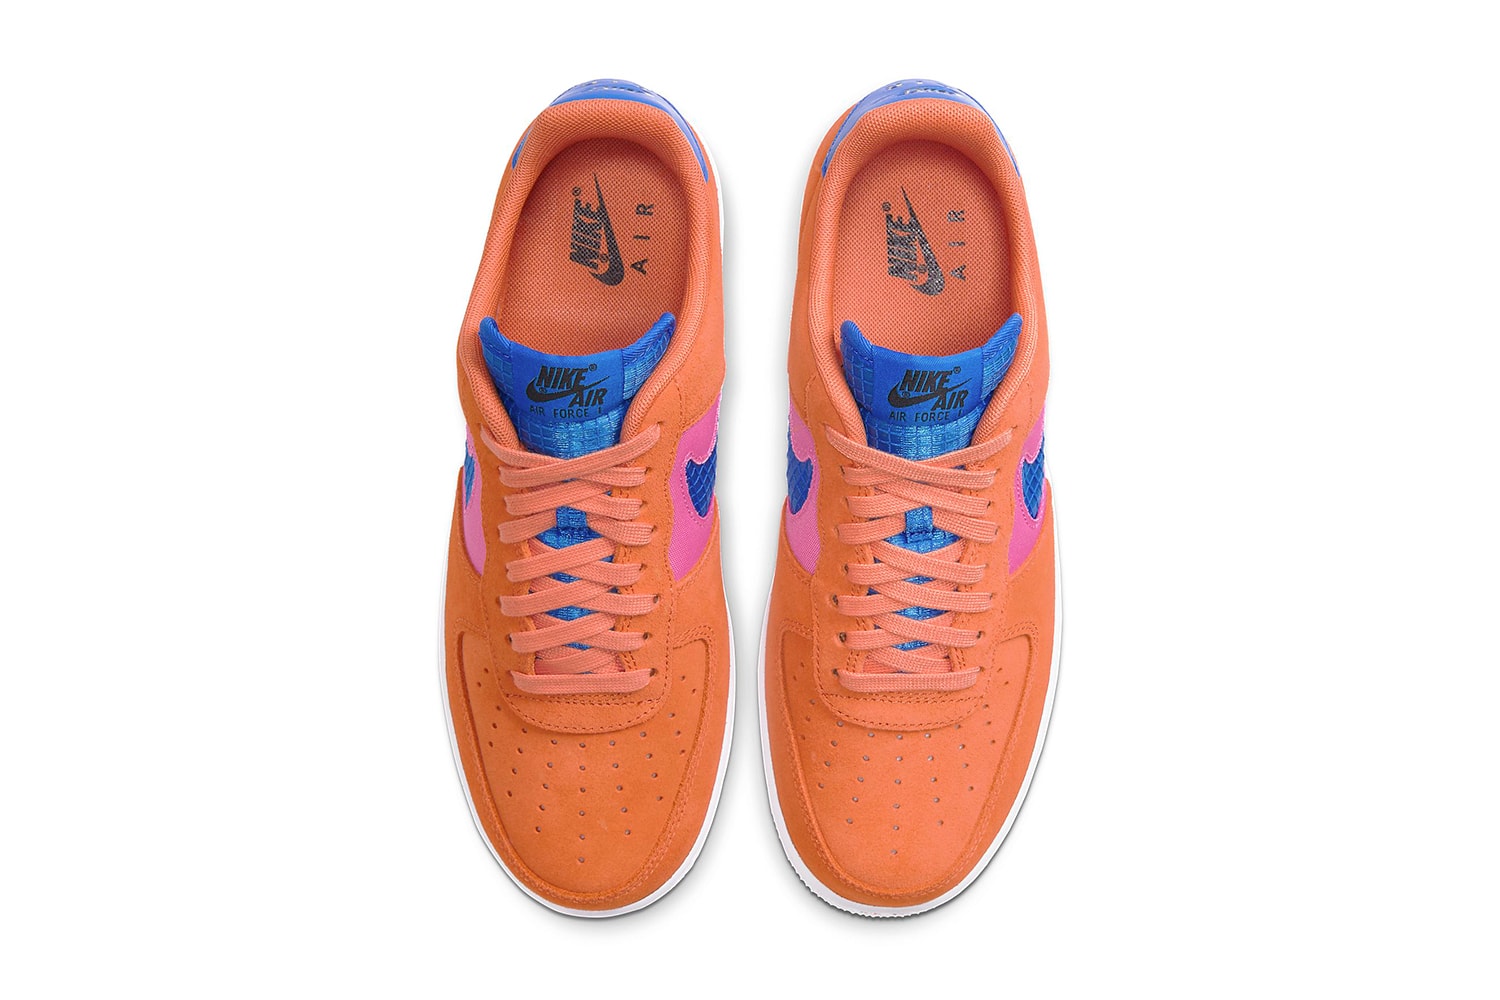 Nike Air Force 1 ’07 LV8 "Orange Trance" Release Info Color: Orange Trance/Lotus Pink/White/Pacific Blue Style Code: CW7300-800 low drop date price details 